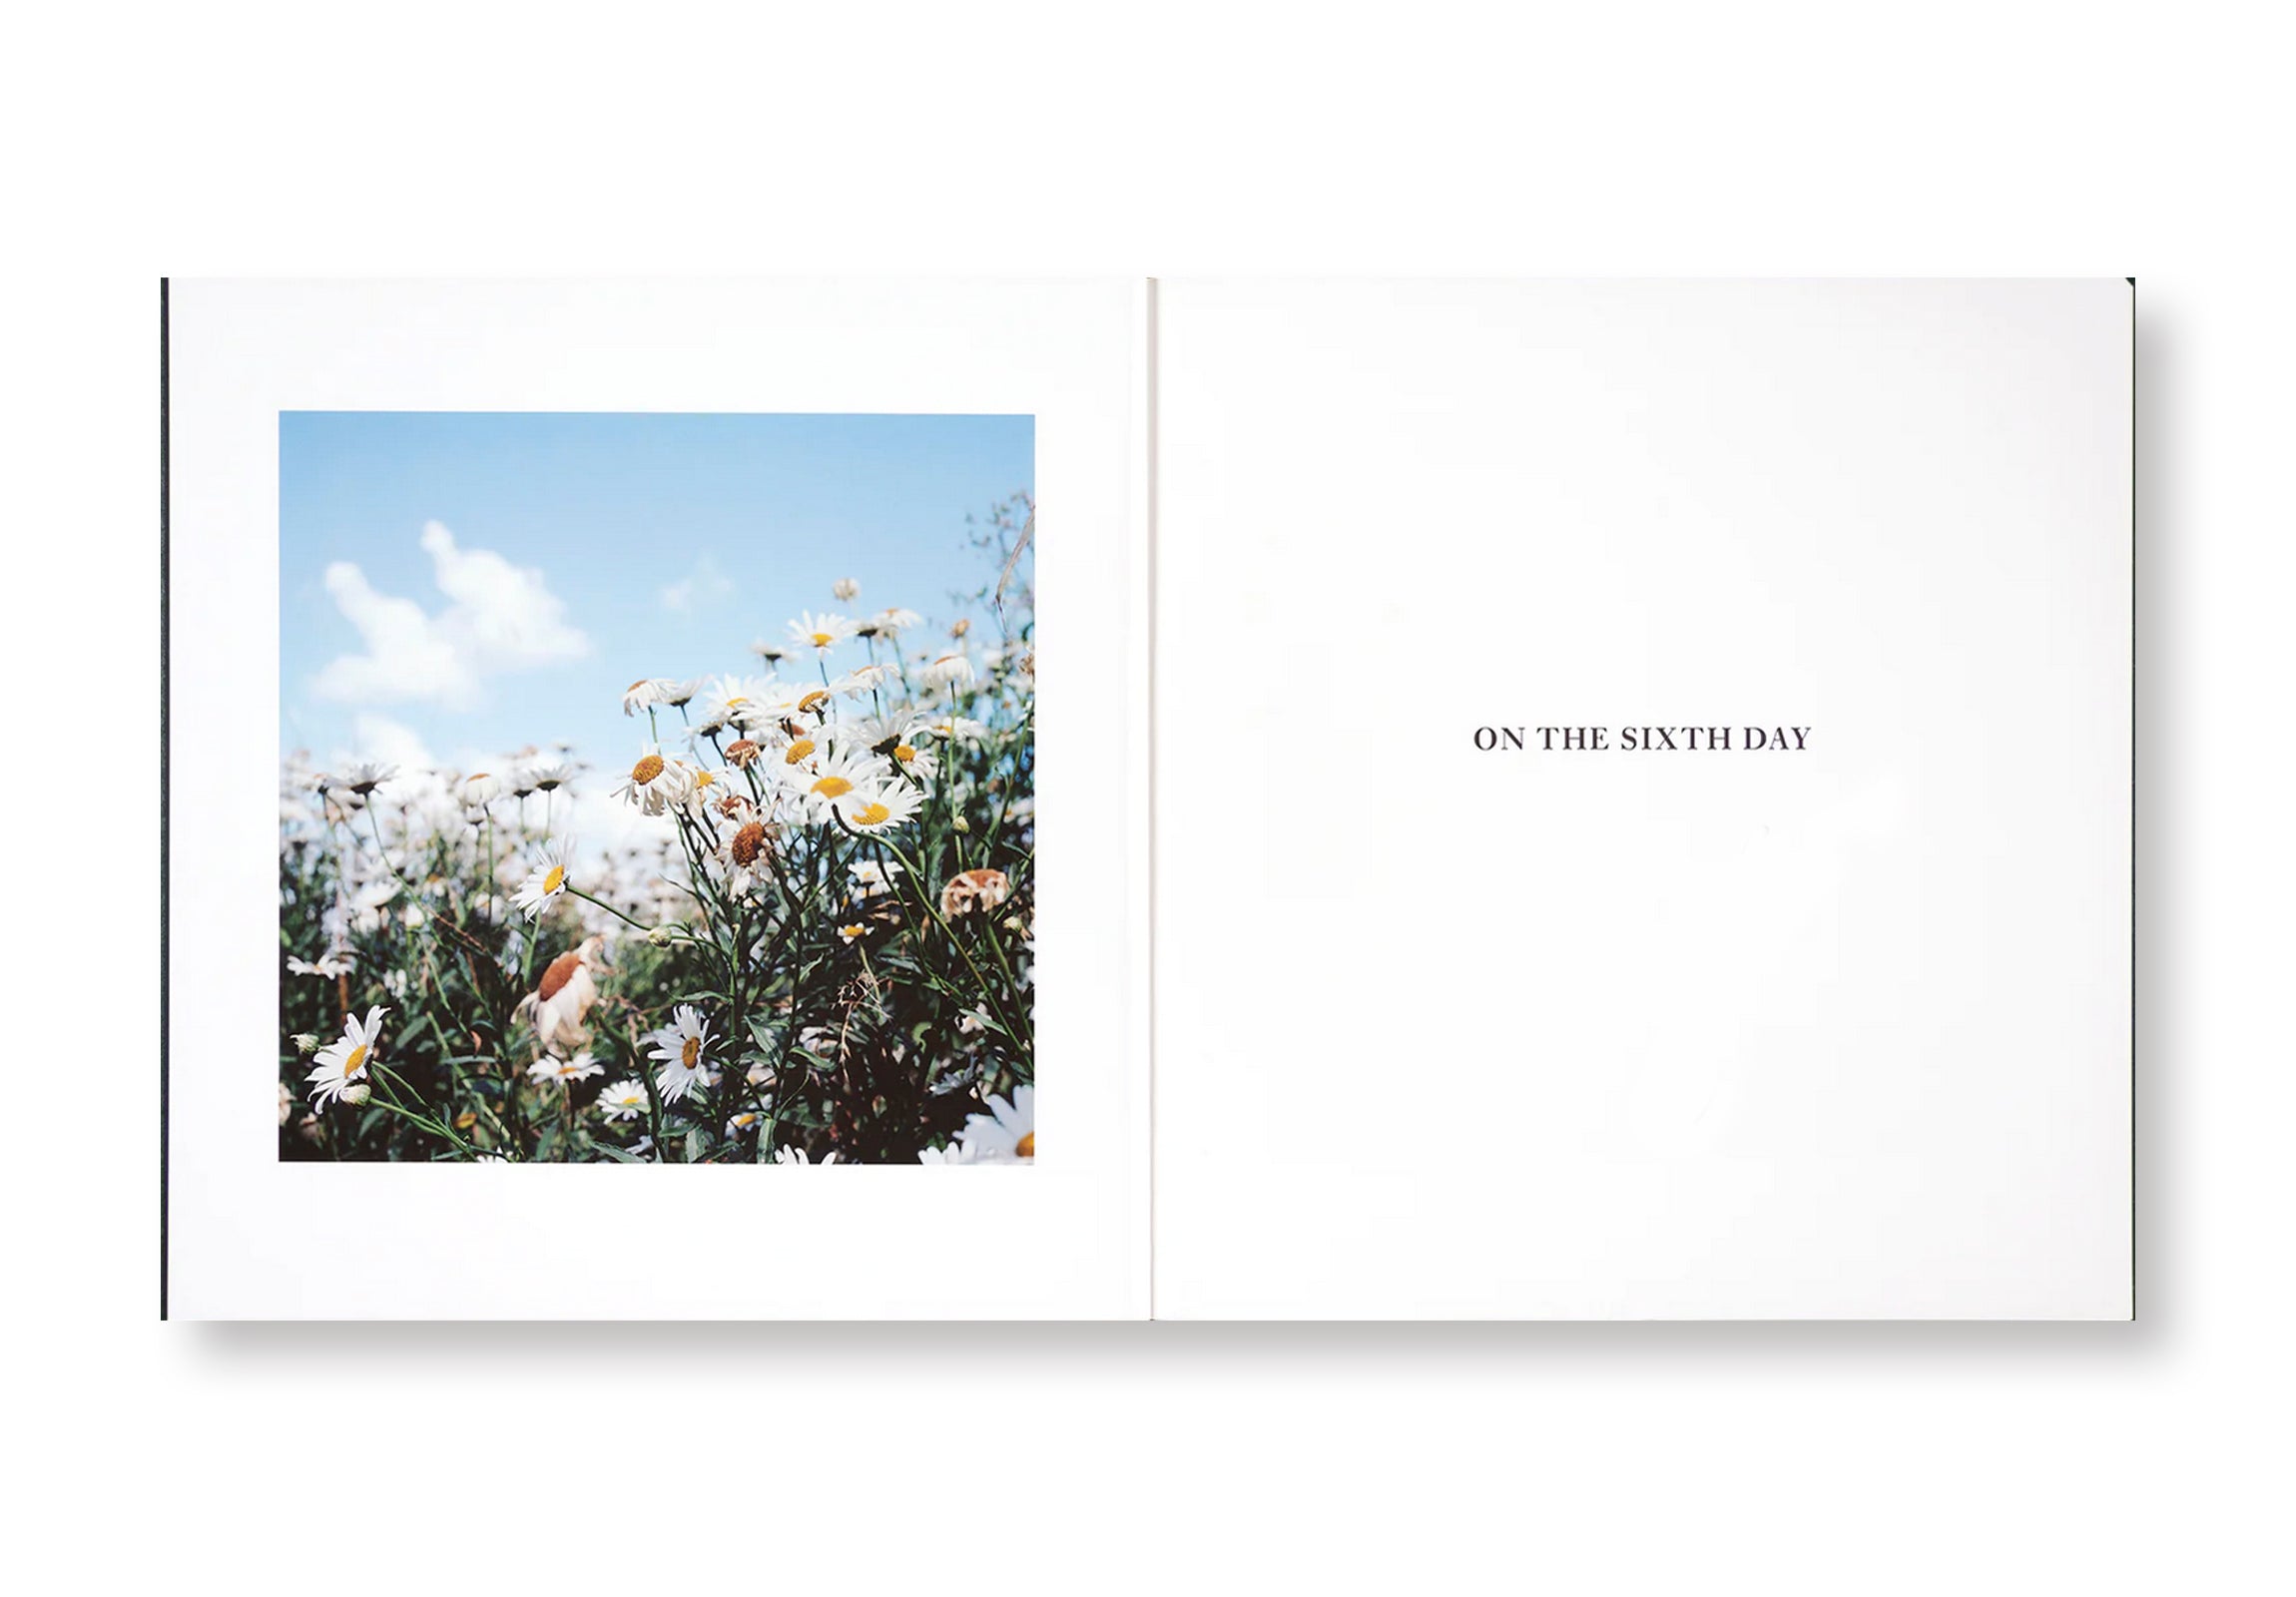 ON THE SIXTH DAY by Alessandra Sanguinetti